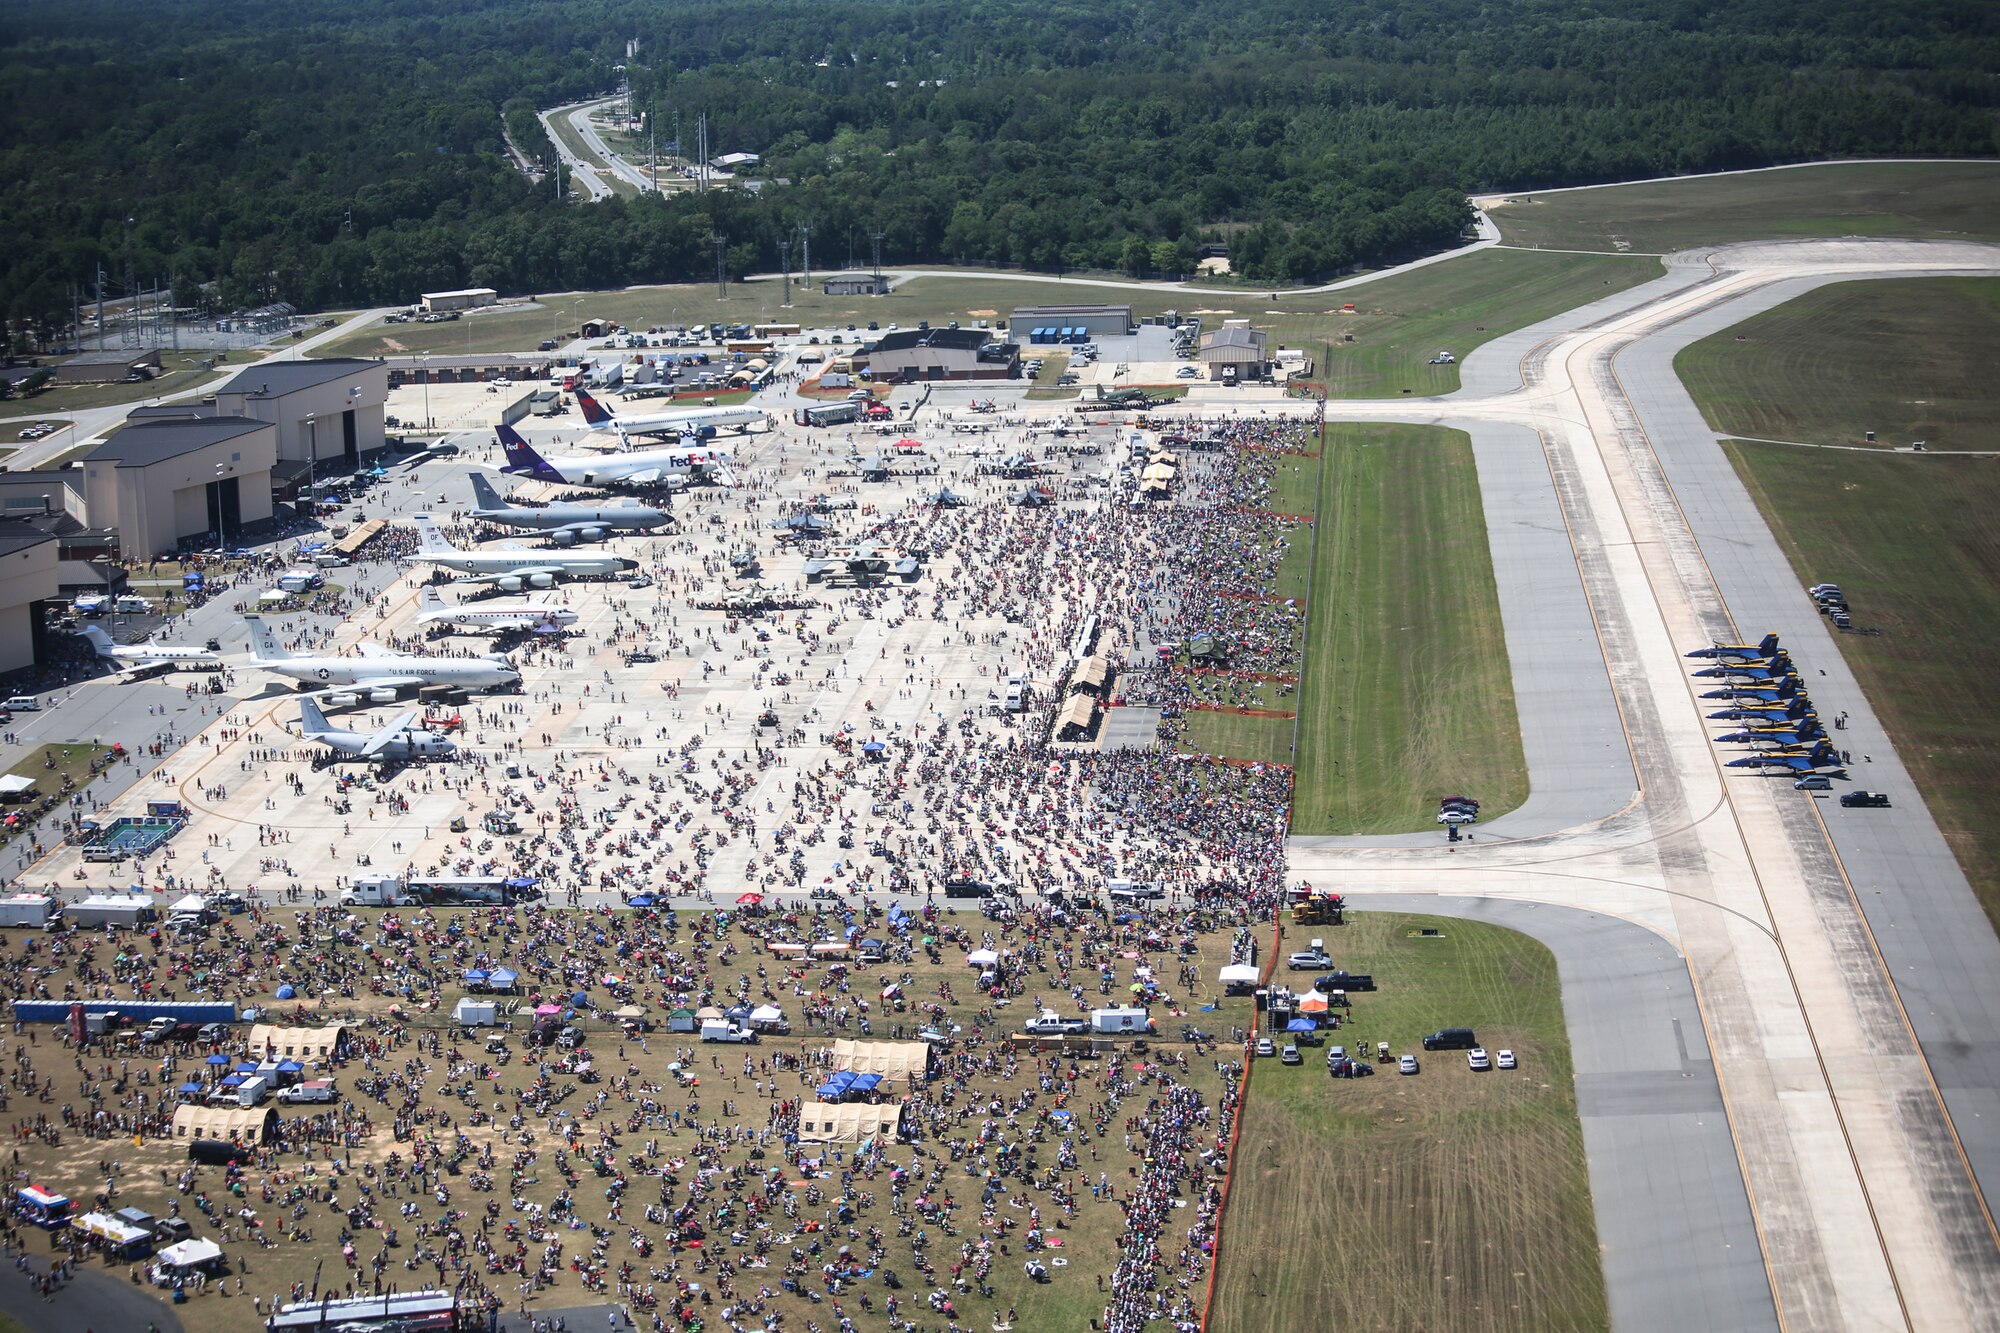 Approximately 100,000 people turned out to Robins Air Force Base to witness the 2012 Air Show. (U.S. Air Force photo by 1st Lt. Joel Cooke)